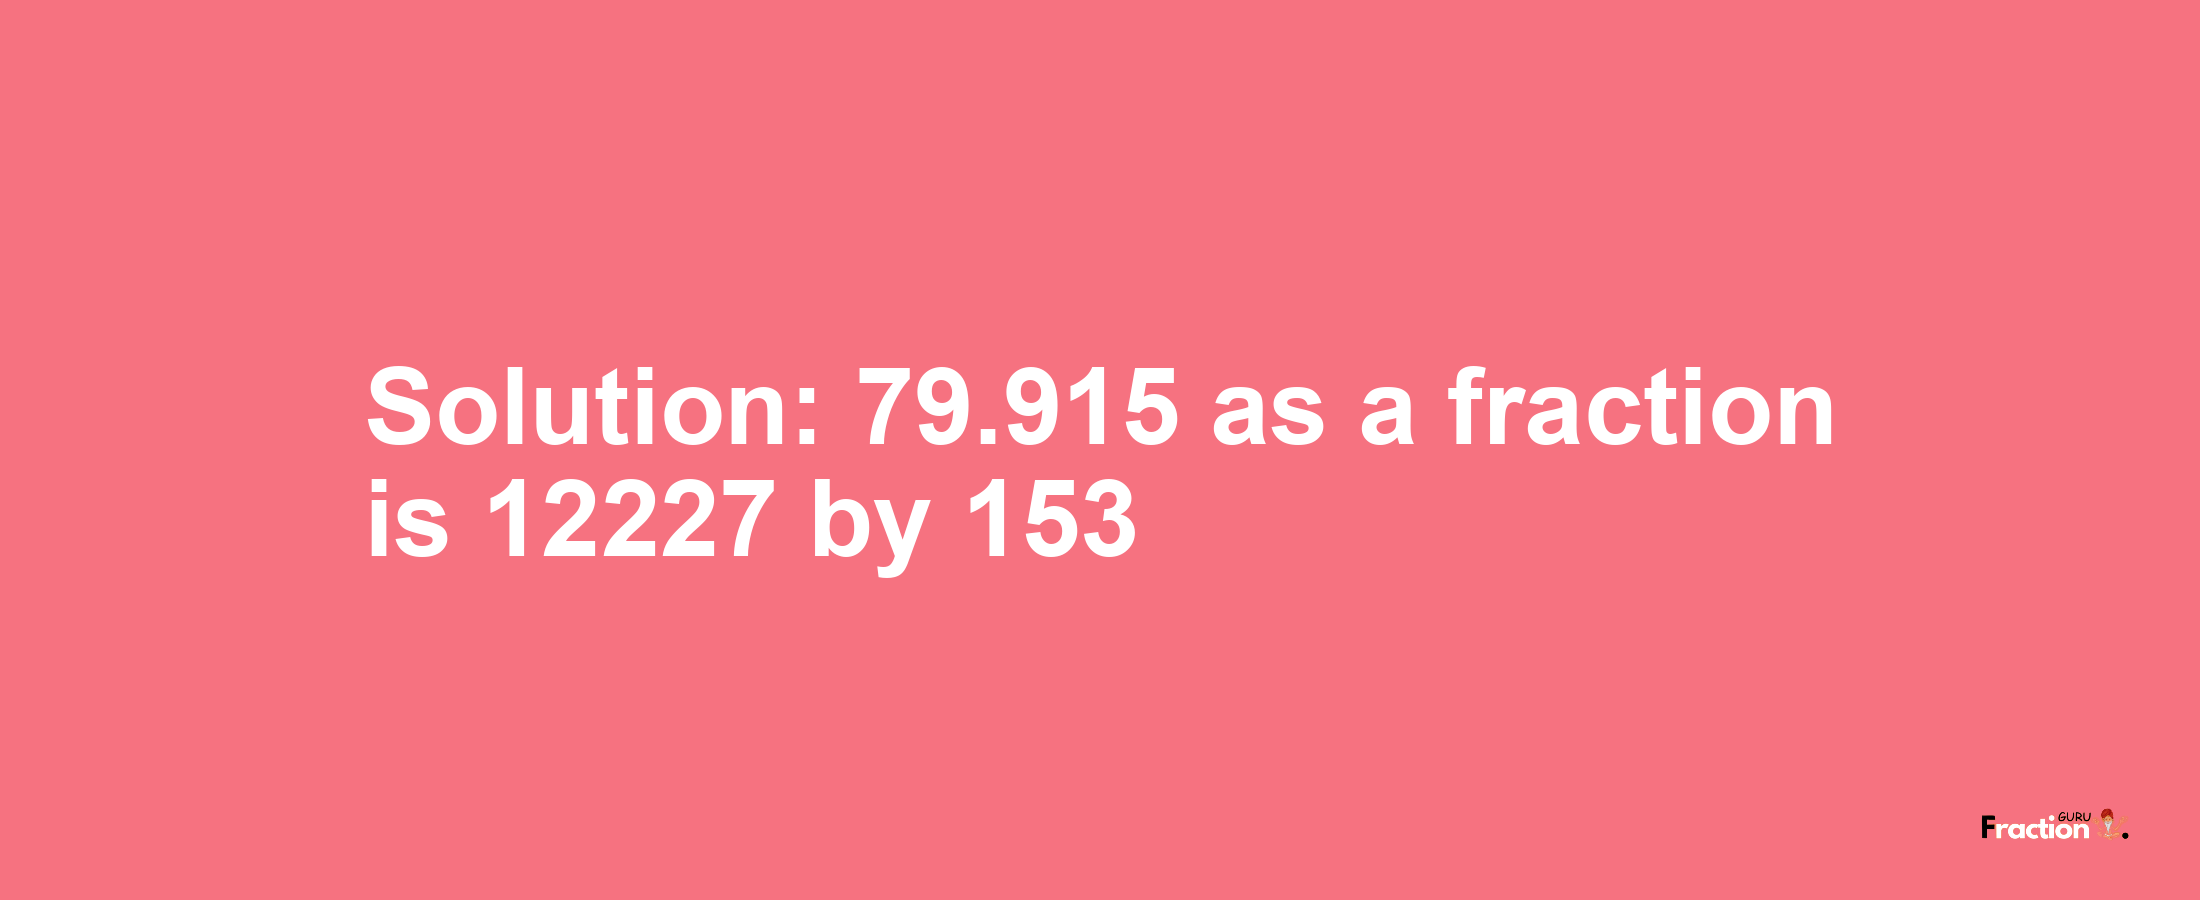 Solution:79.915 as a fraction is 12227/153